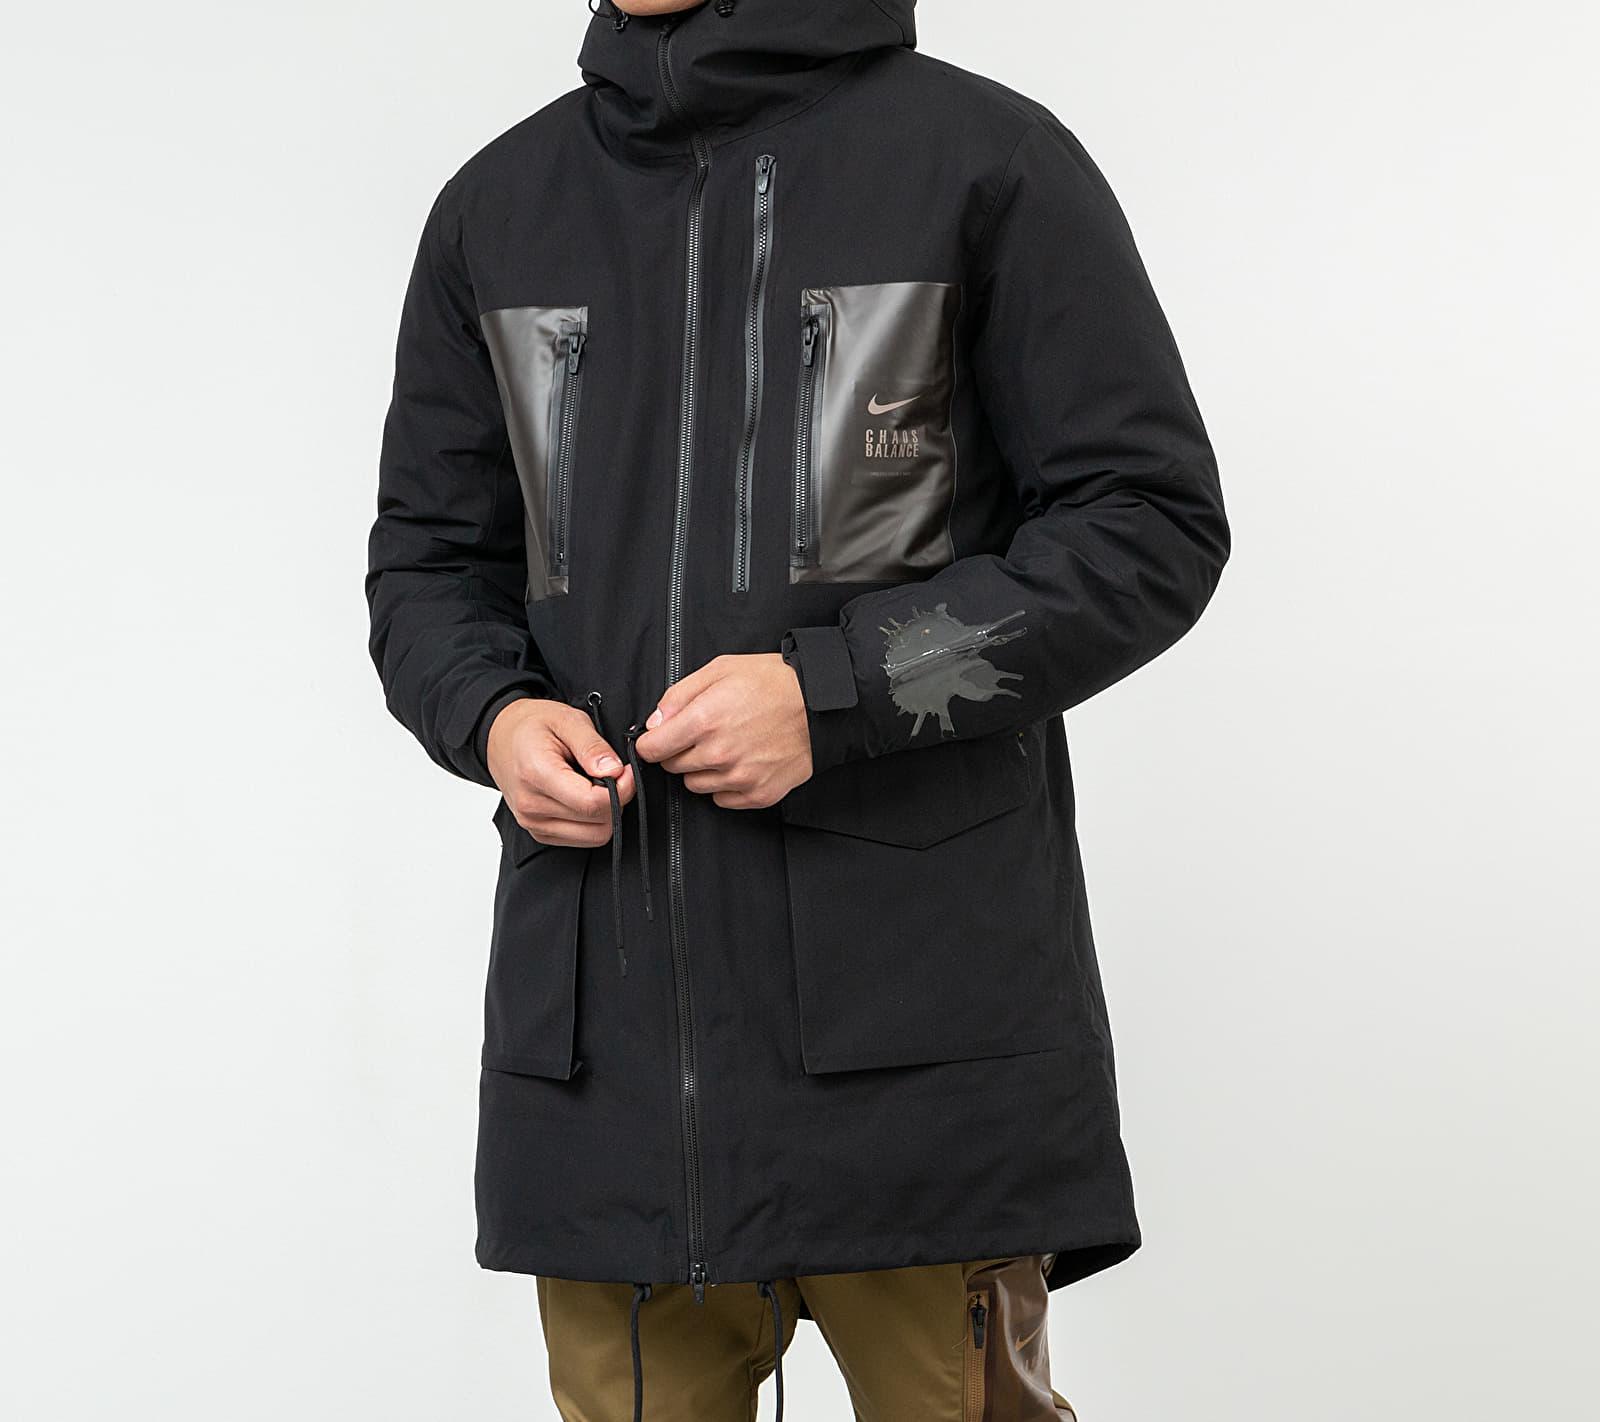 Nike Lab X Undercover Chaos Balance Jacket Black for Men | Lyst